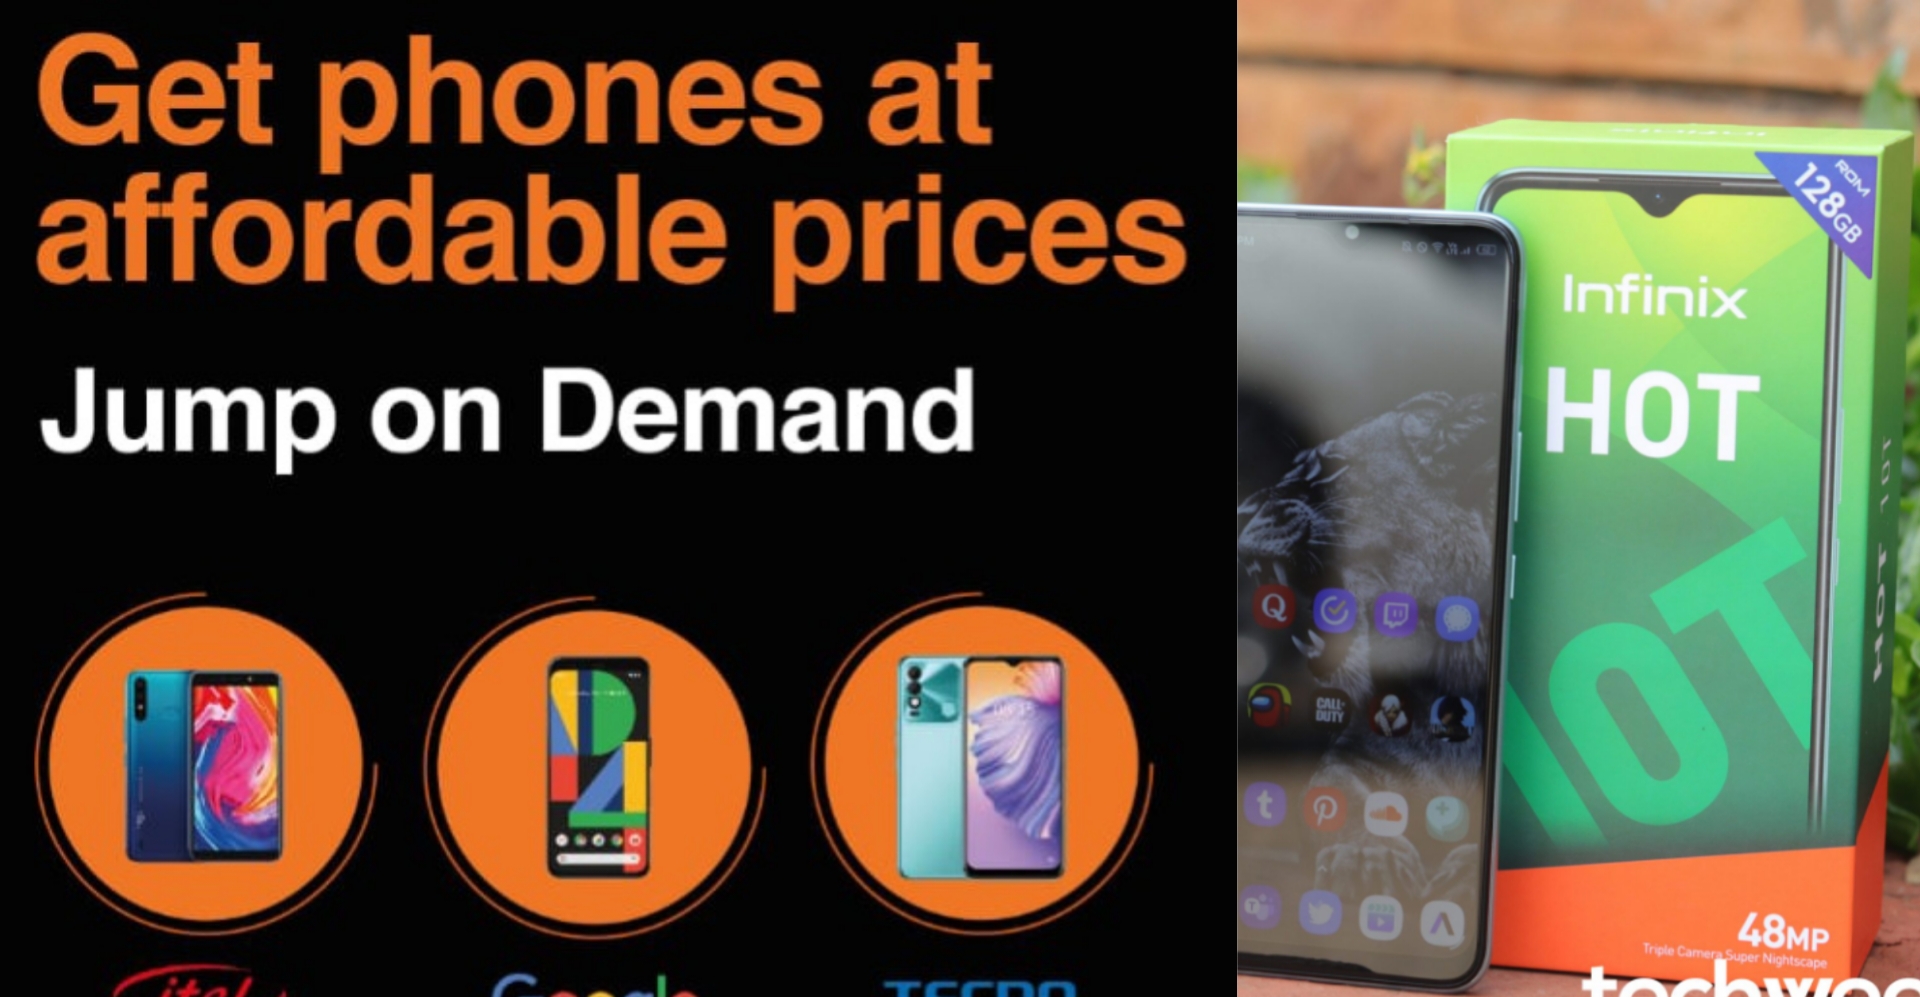 Orange Sierra Leone Releases New Collection of Mobile Phones